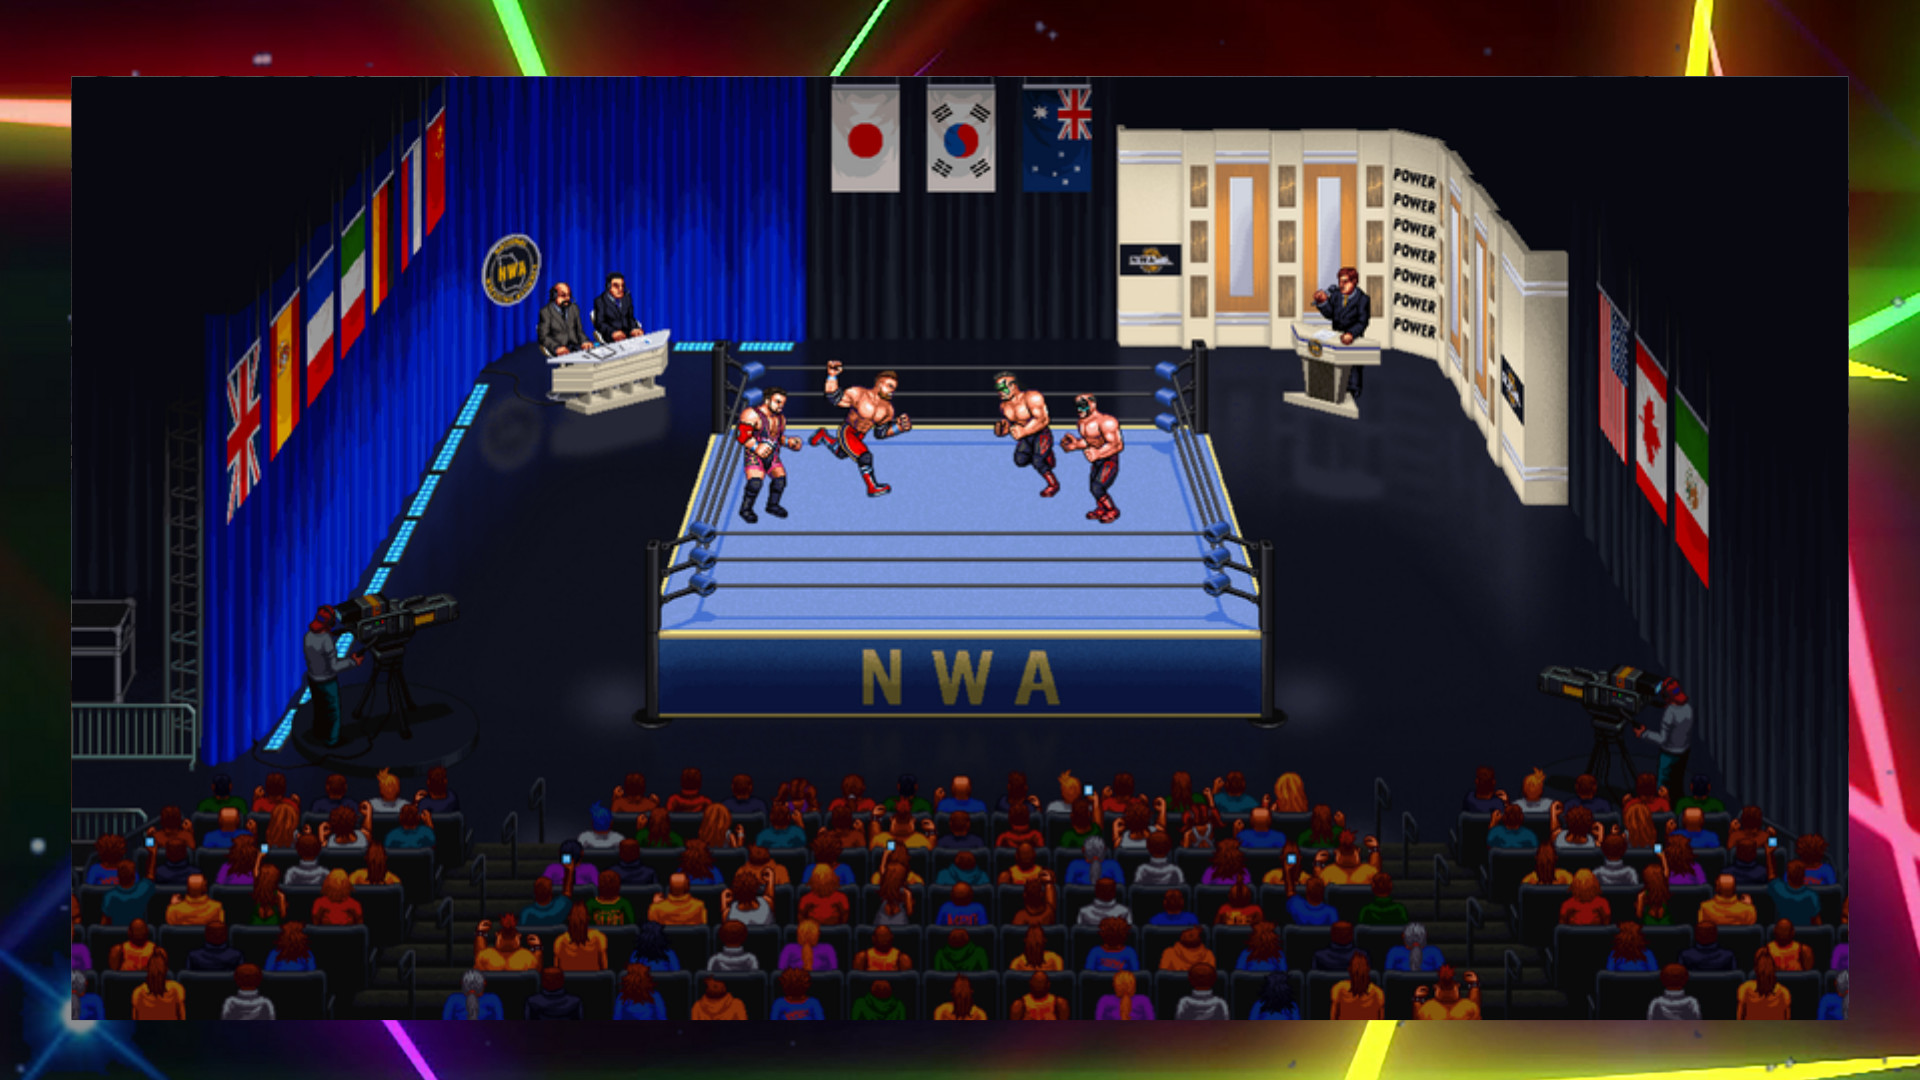 Find the best laptops for RetroMania Wrestling